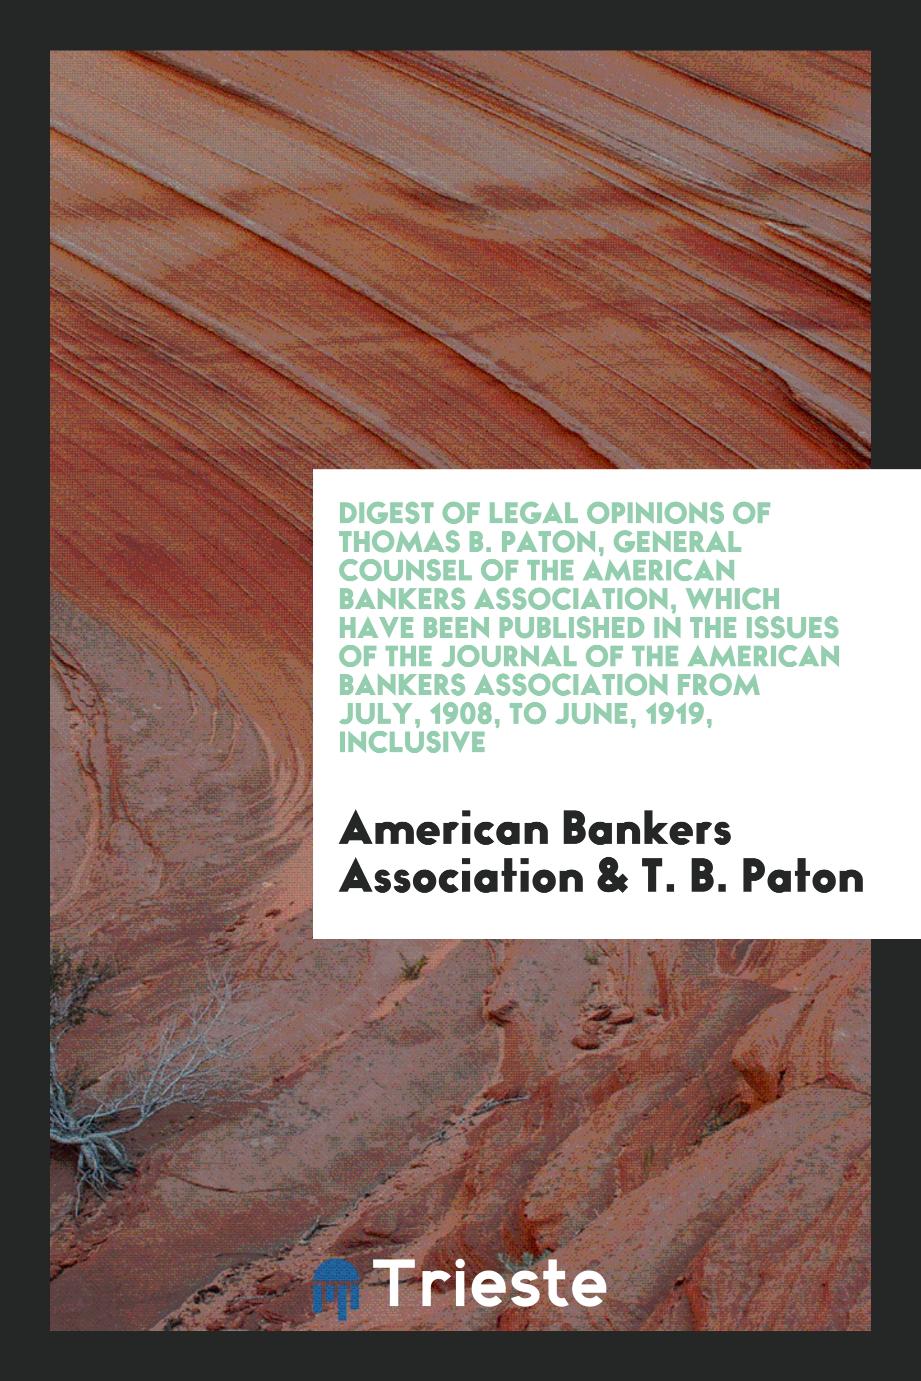 Digest of Legal Opinions of Thomas B. Paton, General Counsel of the American Bankers Association, which Have Been Published in the issues of the Journal of the American Bankers Association from July, 1908, to June, 1919, Inclusive